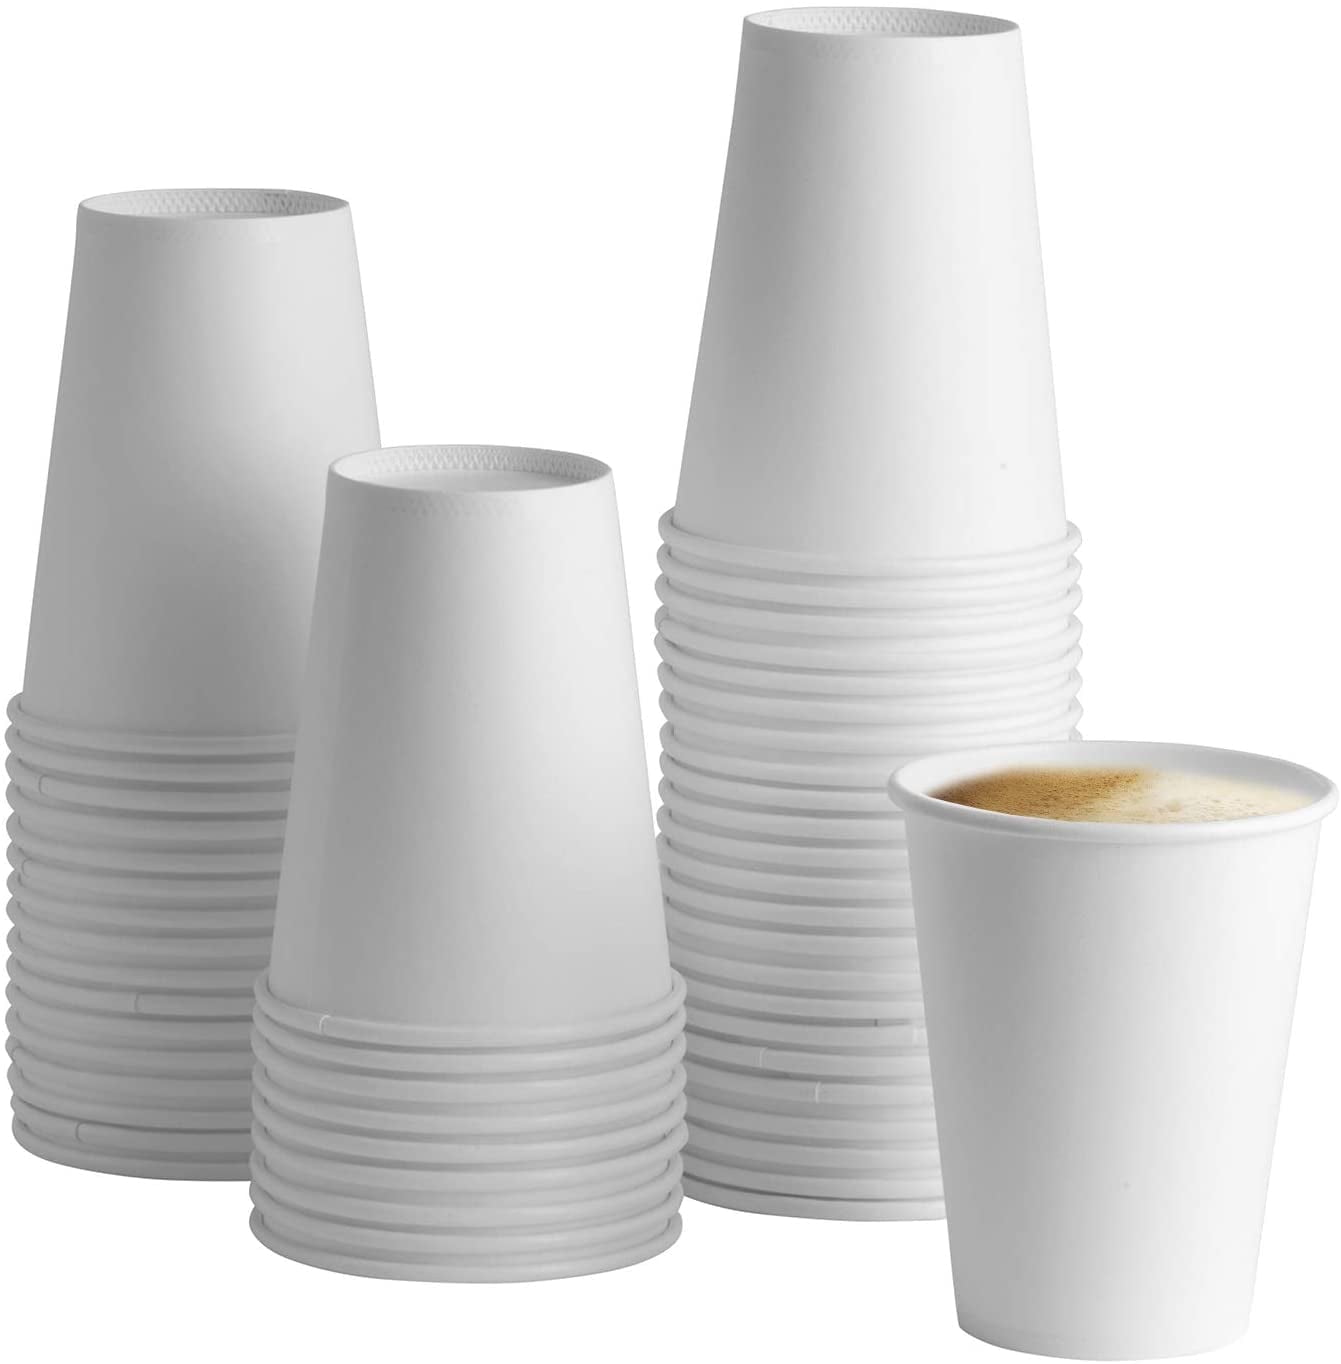 Choice 4 oz. White Poly Paper Hot Cup - 50/Pack